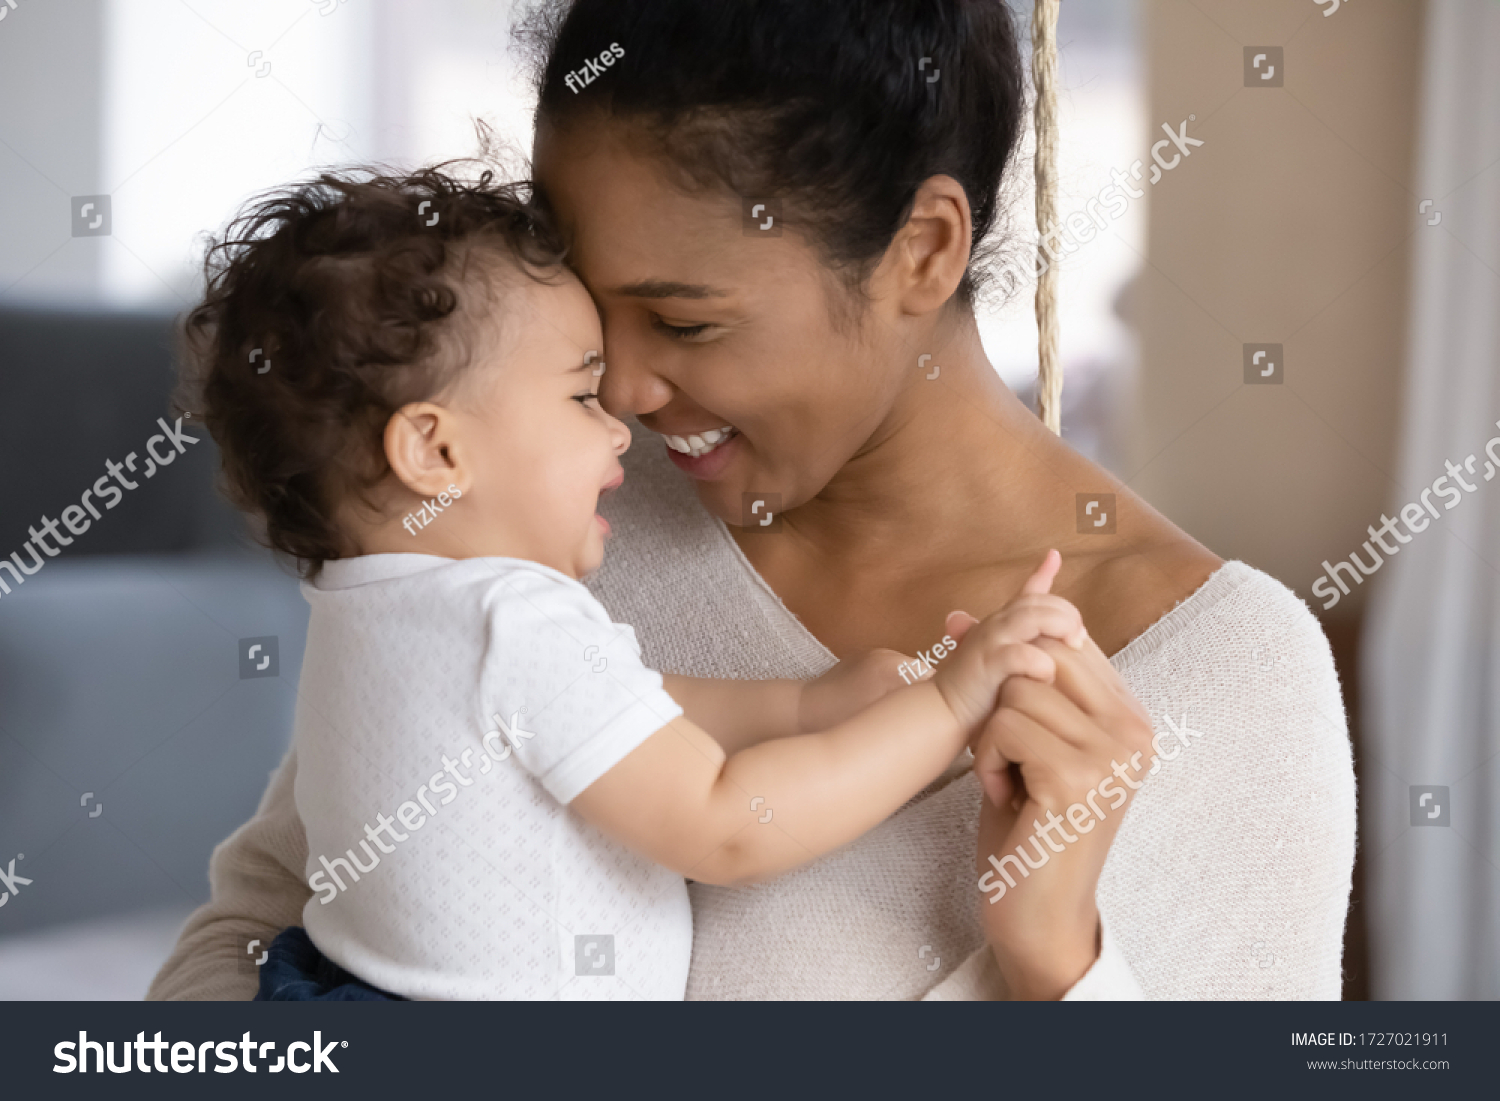 Close up of happy young african American mother hug cuddle little infant or toddler, loving smiling biracial mom embrace small baby child, enjoy tender family moment, motherhood, childcare concept #1727021911